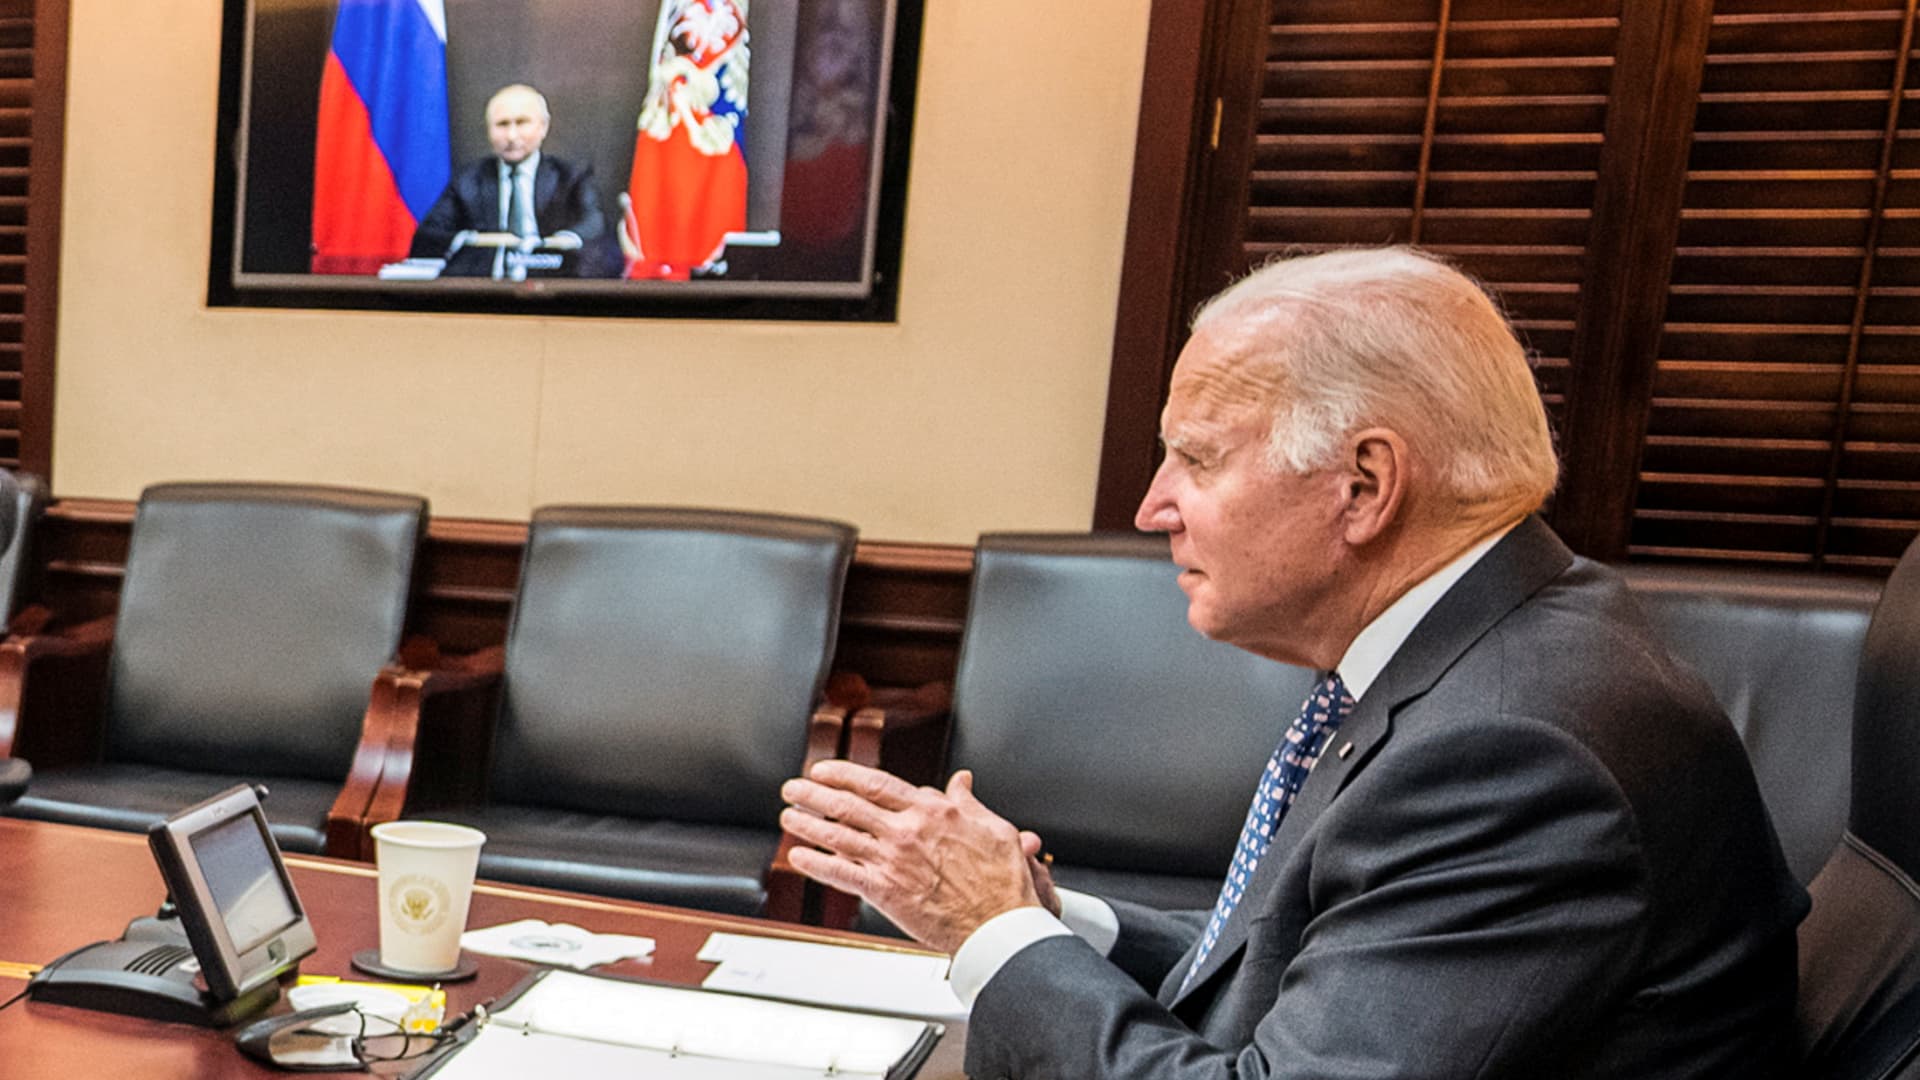 U.S. President Joe Biden holds virtual talks with Russia's President Vladimir Putin amid Western fears that Moscow plans to attack Ukraine, during a secure video call from the Situation Room at the White House in Washington, U.S., December 7, 2021.